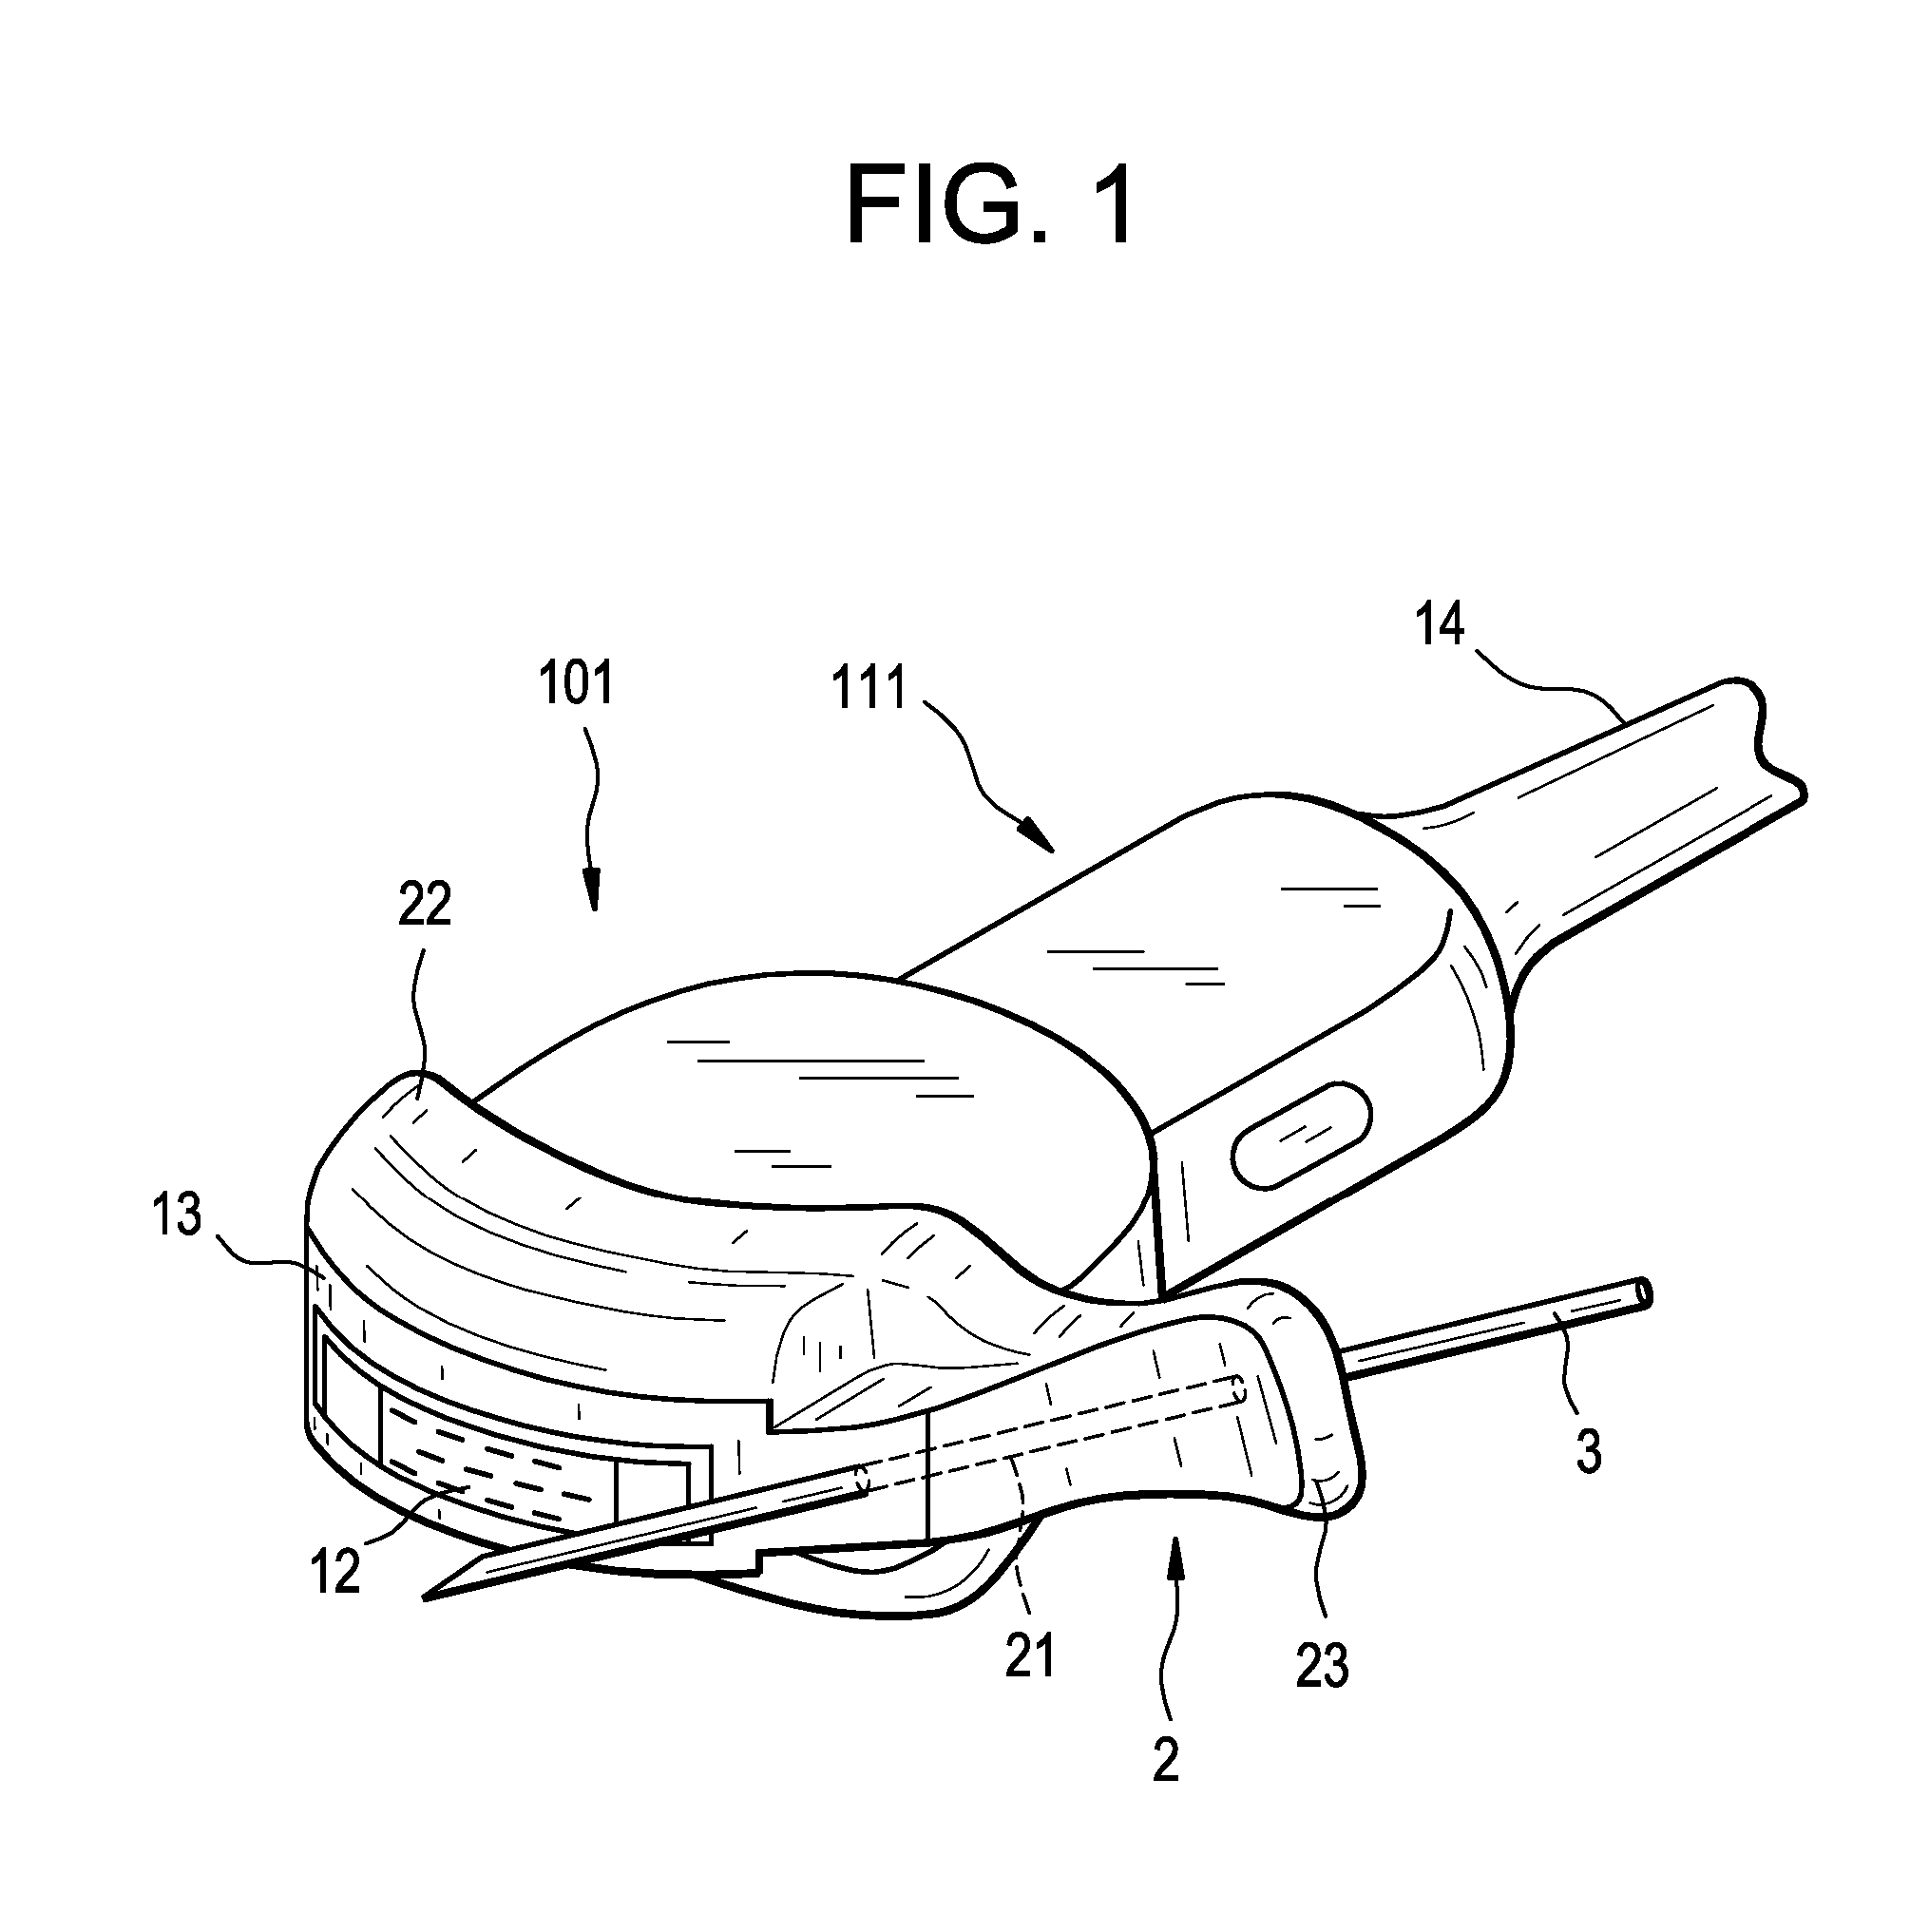 Ultrasound probe for paracentesis and ultrasound diagnostic apparatus